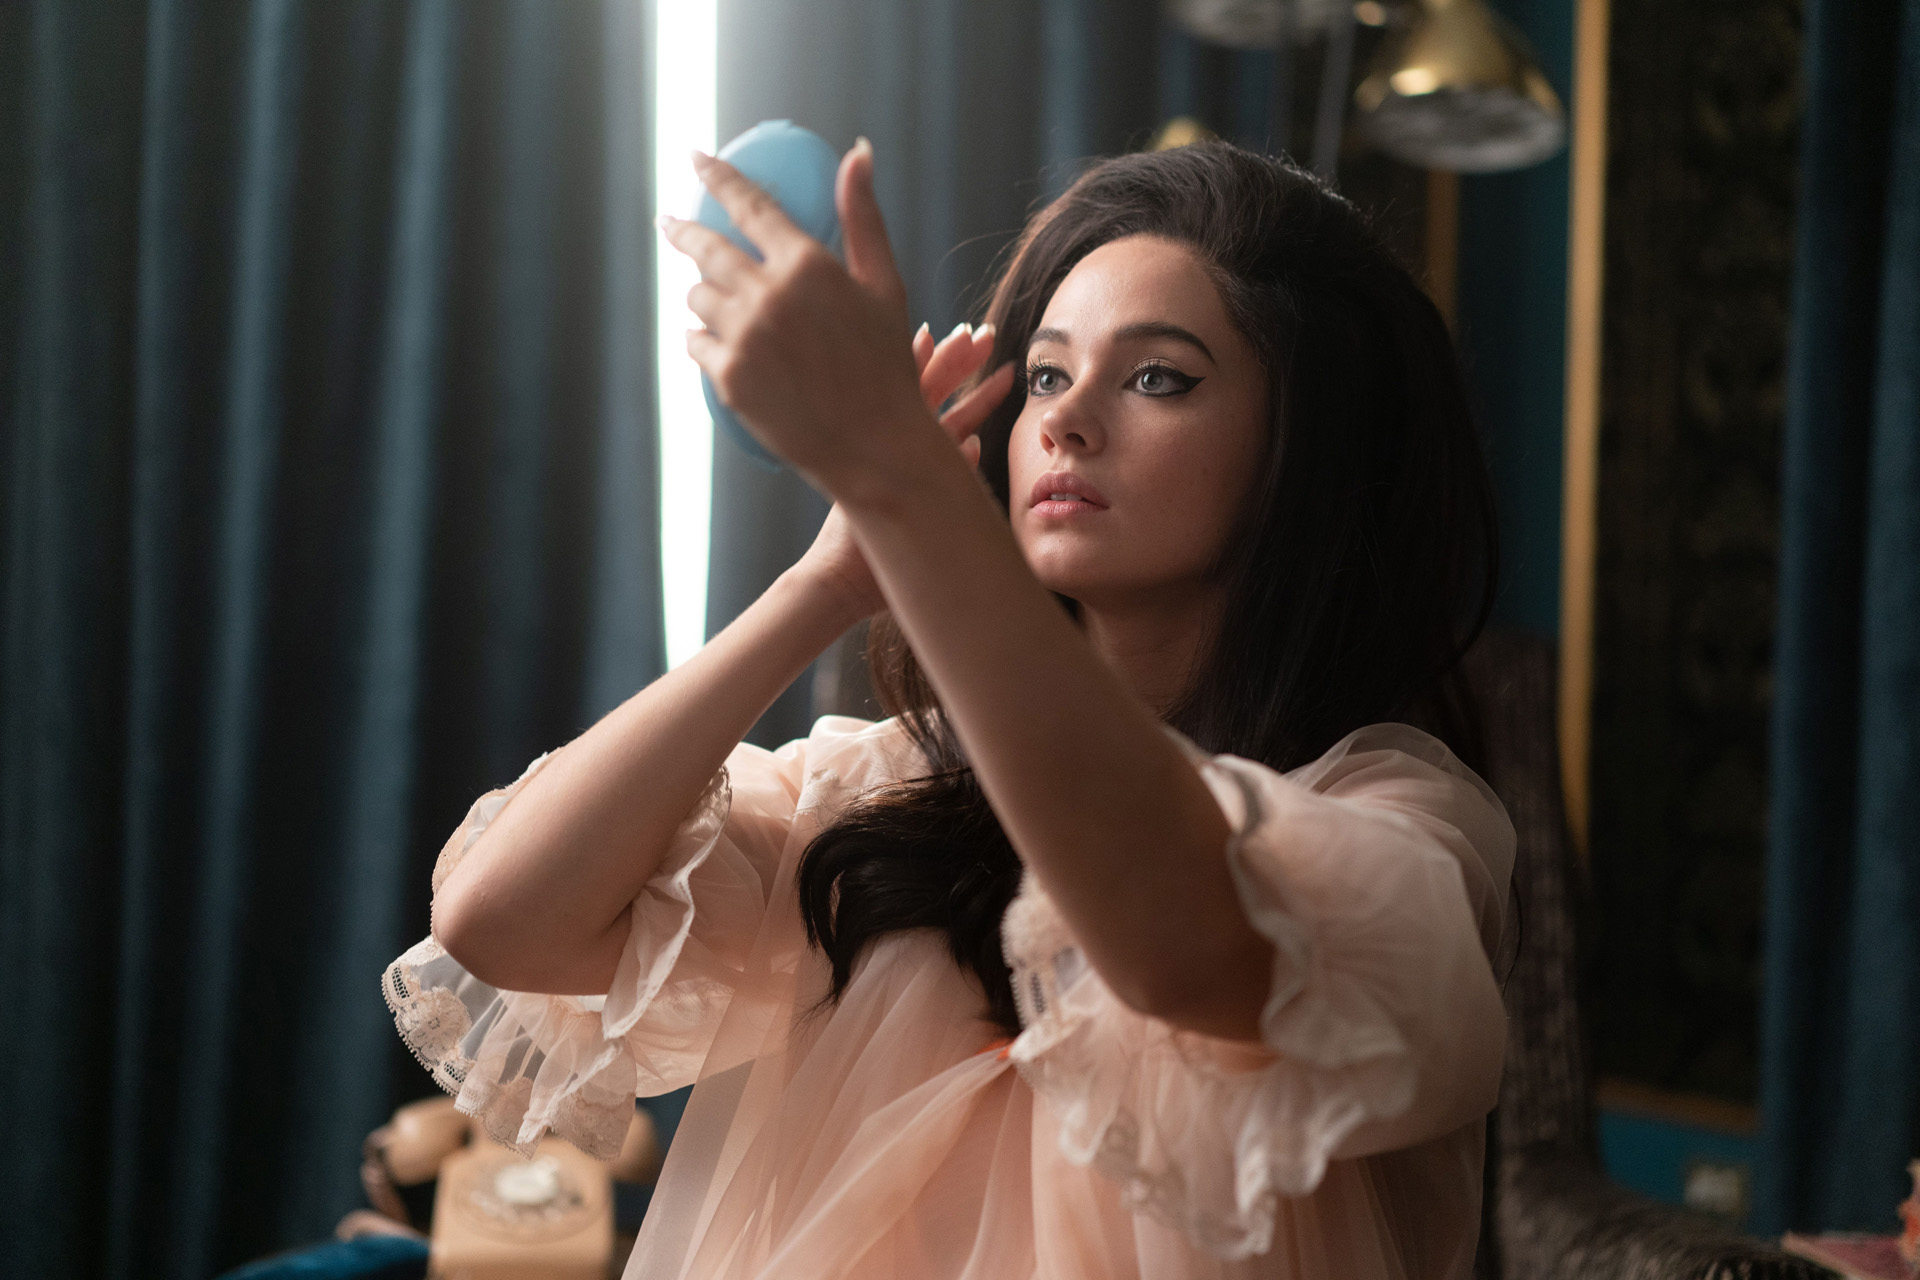 Cailee Spaeny as Priscilla Presley | woman with dark bouffant hair looking in hand mirror